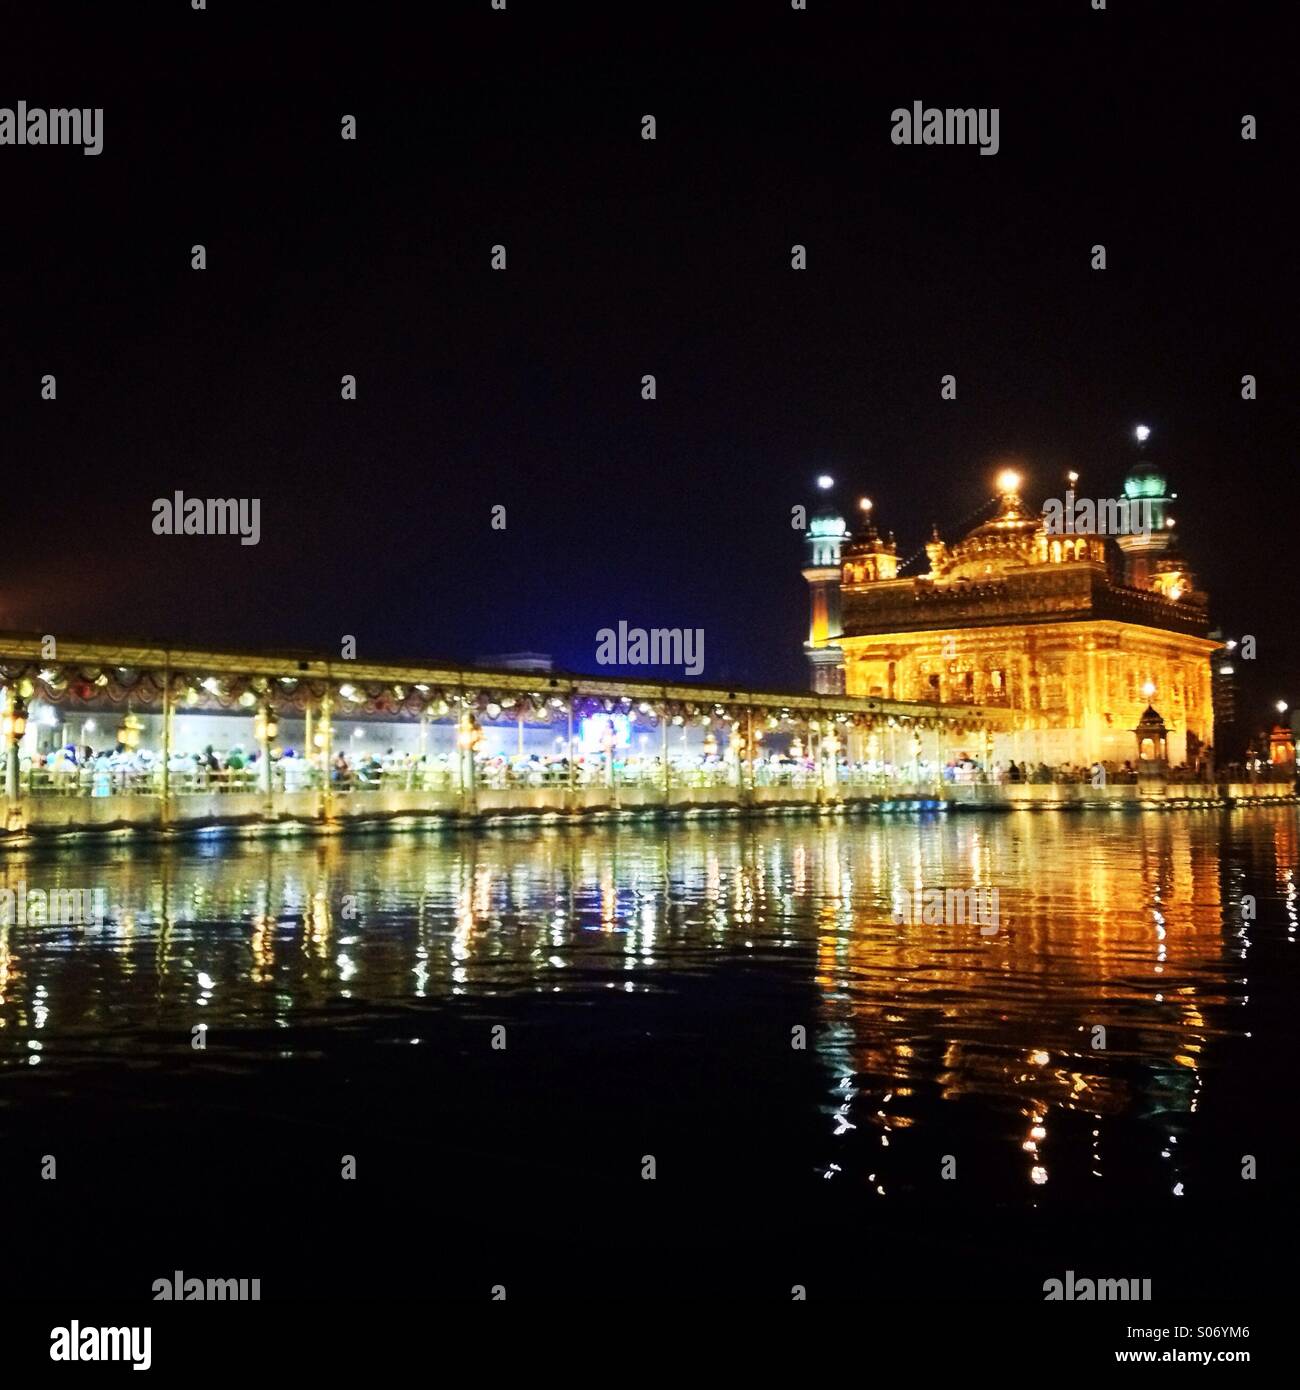 Golden Temple at Amritsar, India during night time Stock Photo